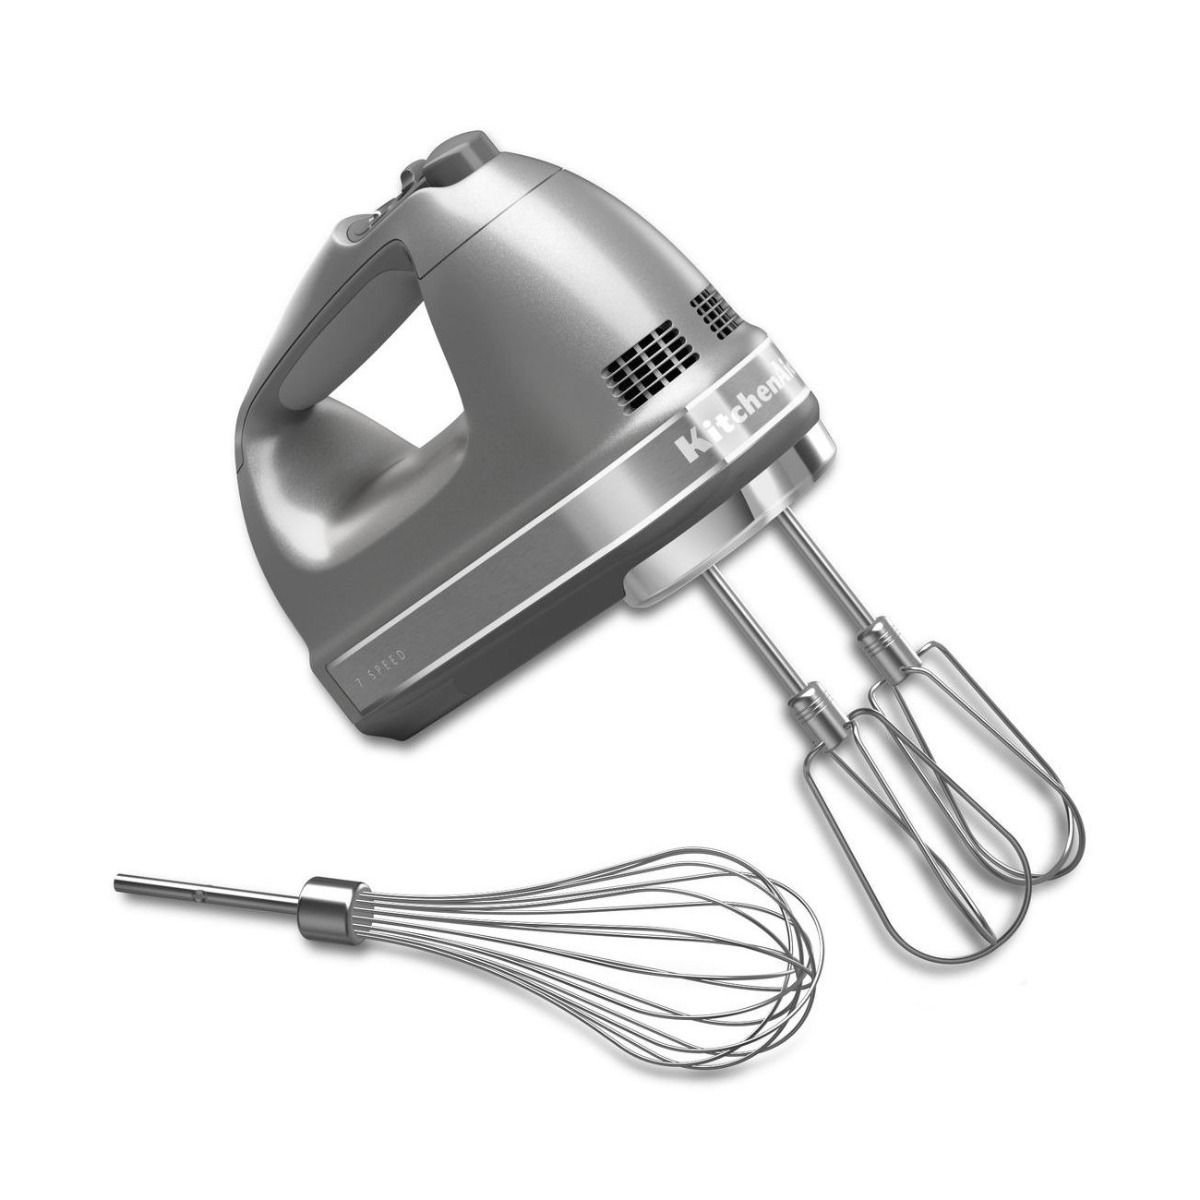 KitchenAid Electric Hand Mixer with Digital Speed Control: 7 Speeds, Silver Color (KHM7210CU) | Everything Kitchens